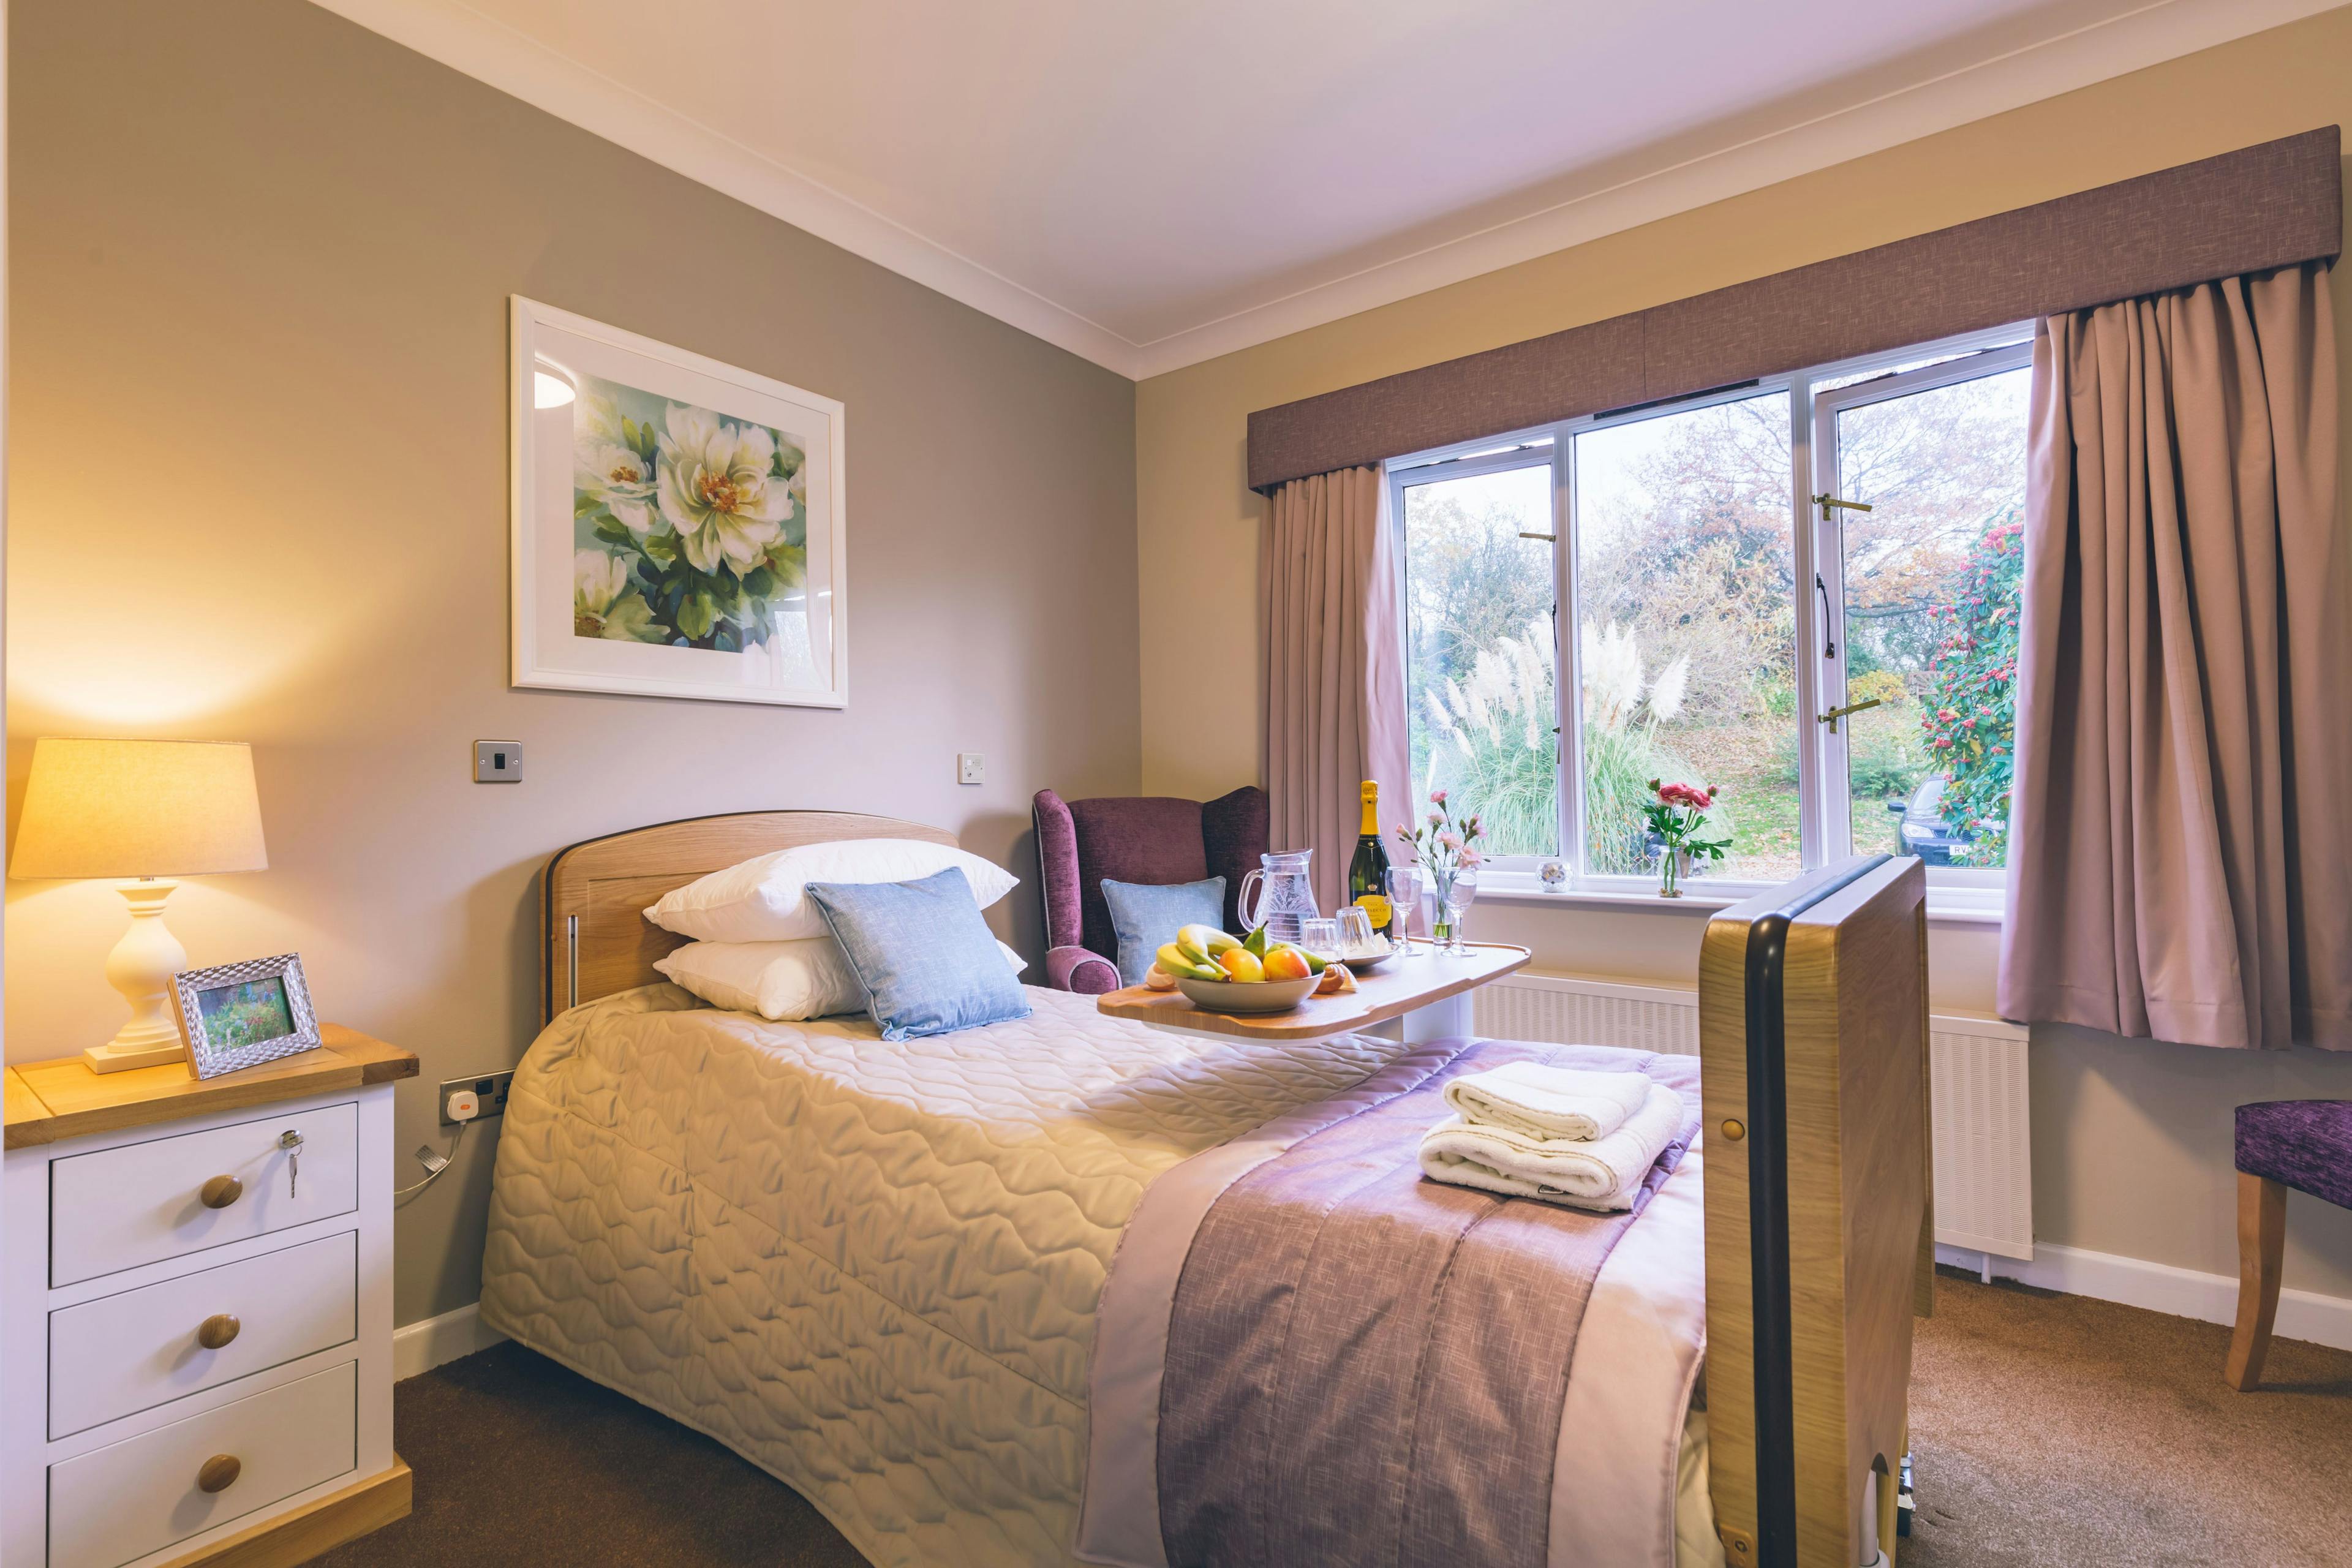 Bedroom of Vecta House Care Home in Newport, Isle of Wight